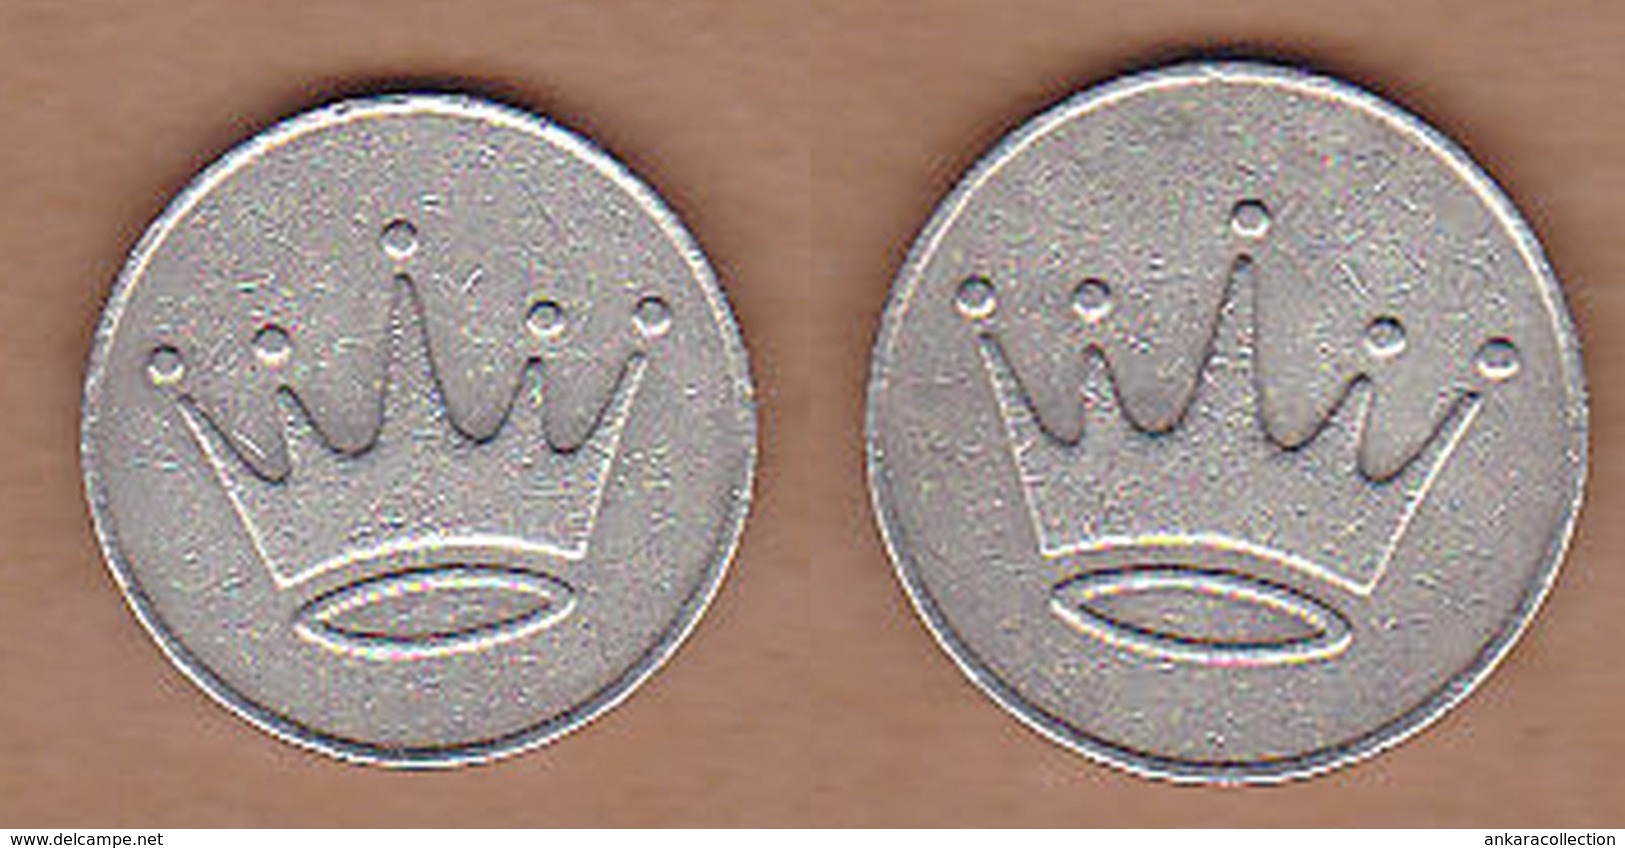 AC - CROWN ILLUSTRATED GAME - AMUSEMENT TOKEN - JETON FROM TURKEY - Souvenir-Medaille (elongated Coins)